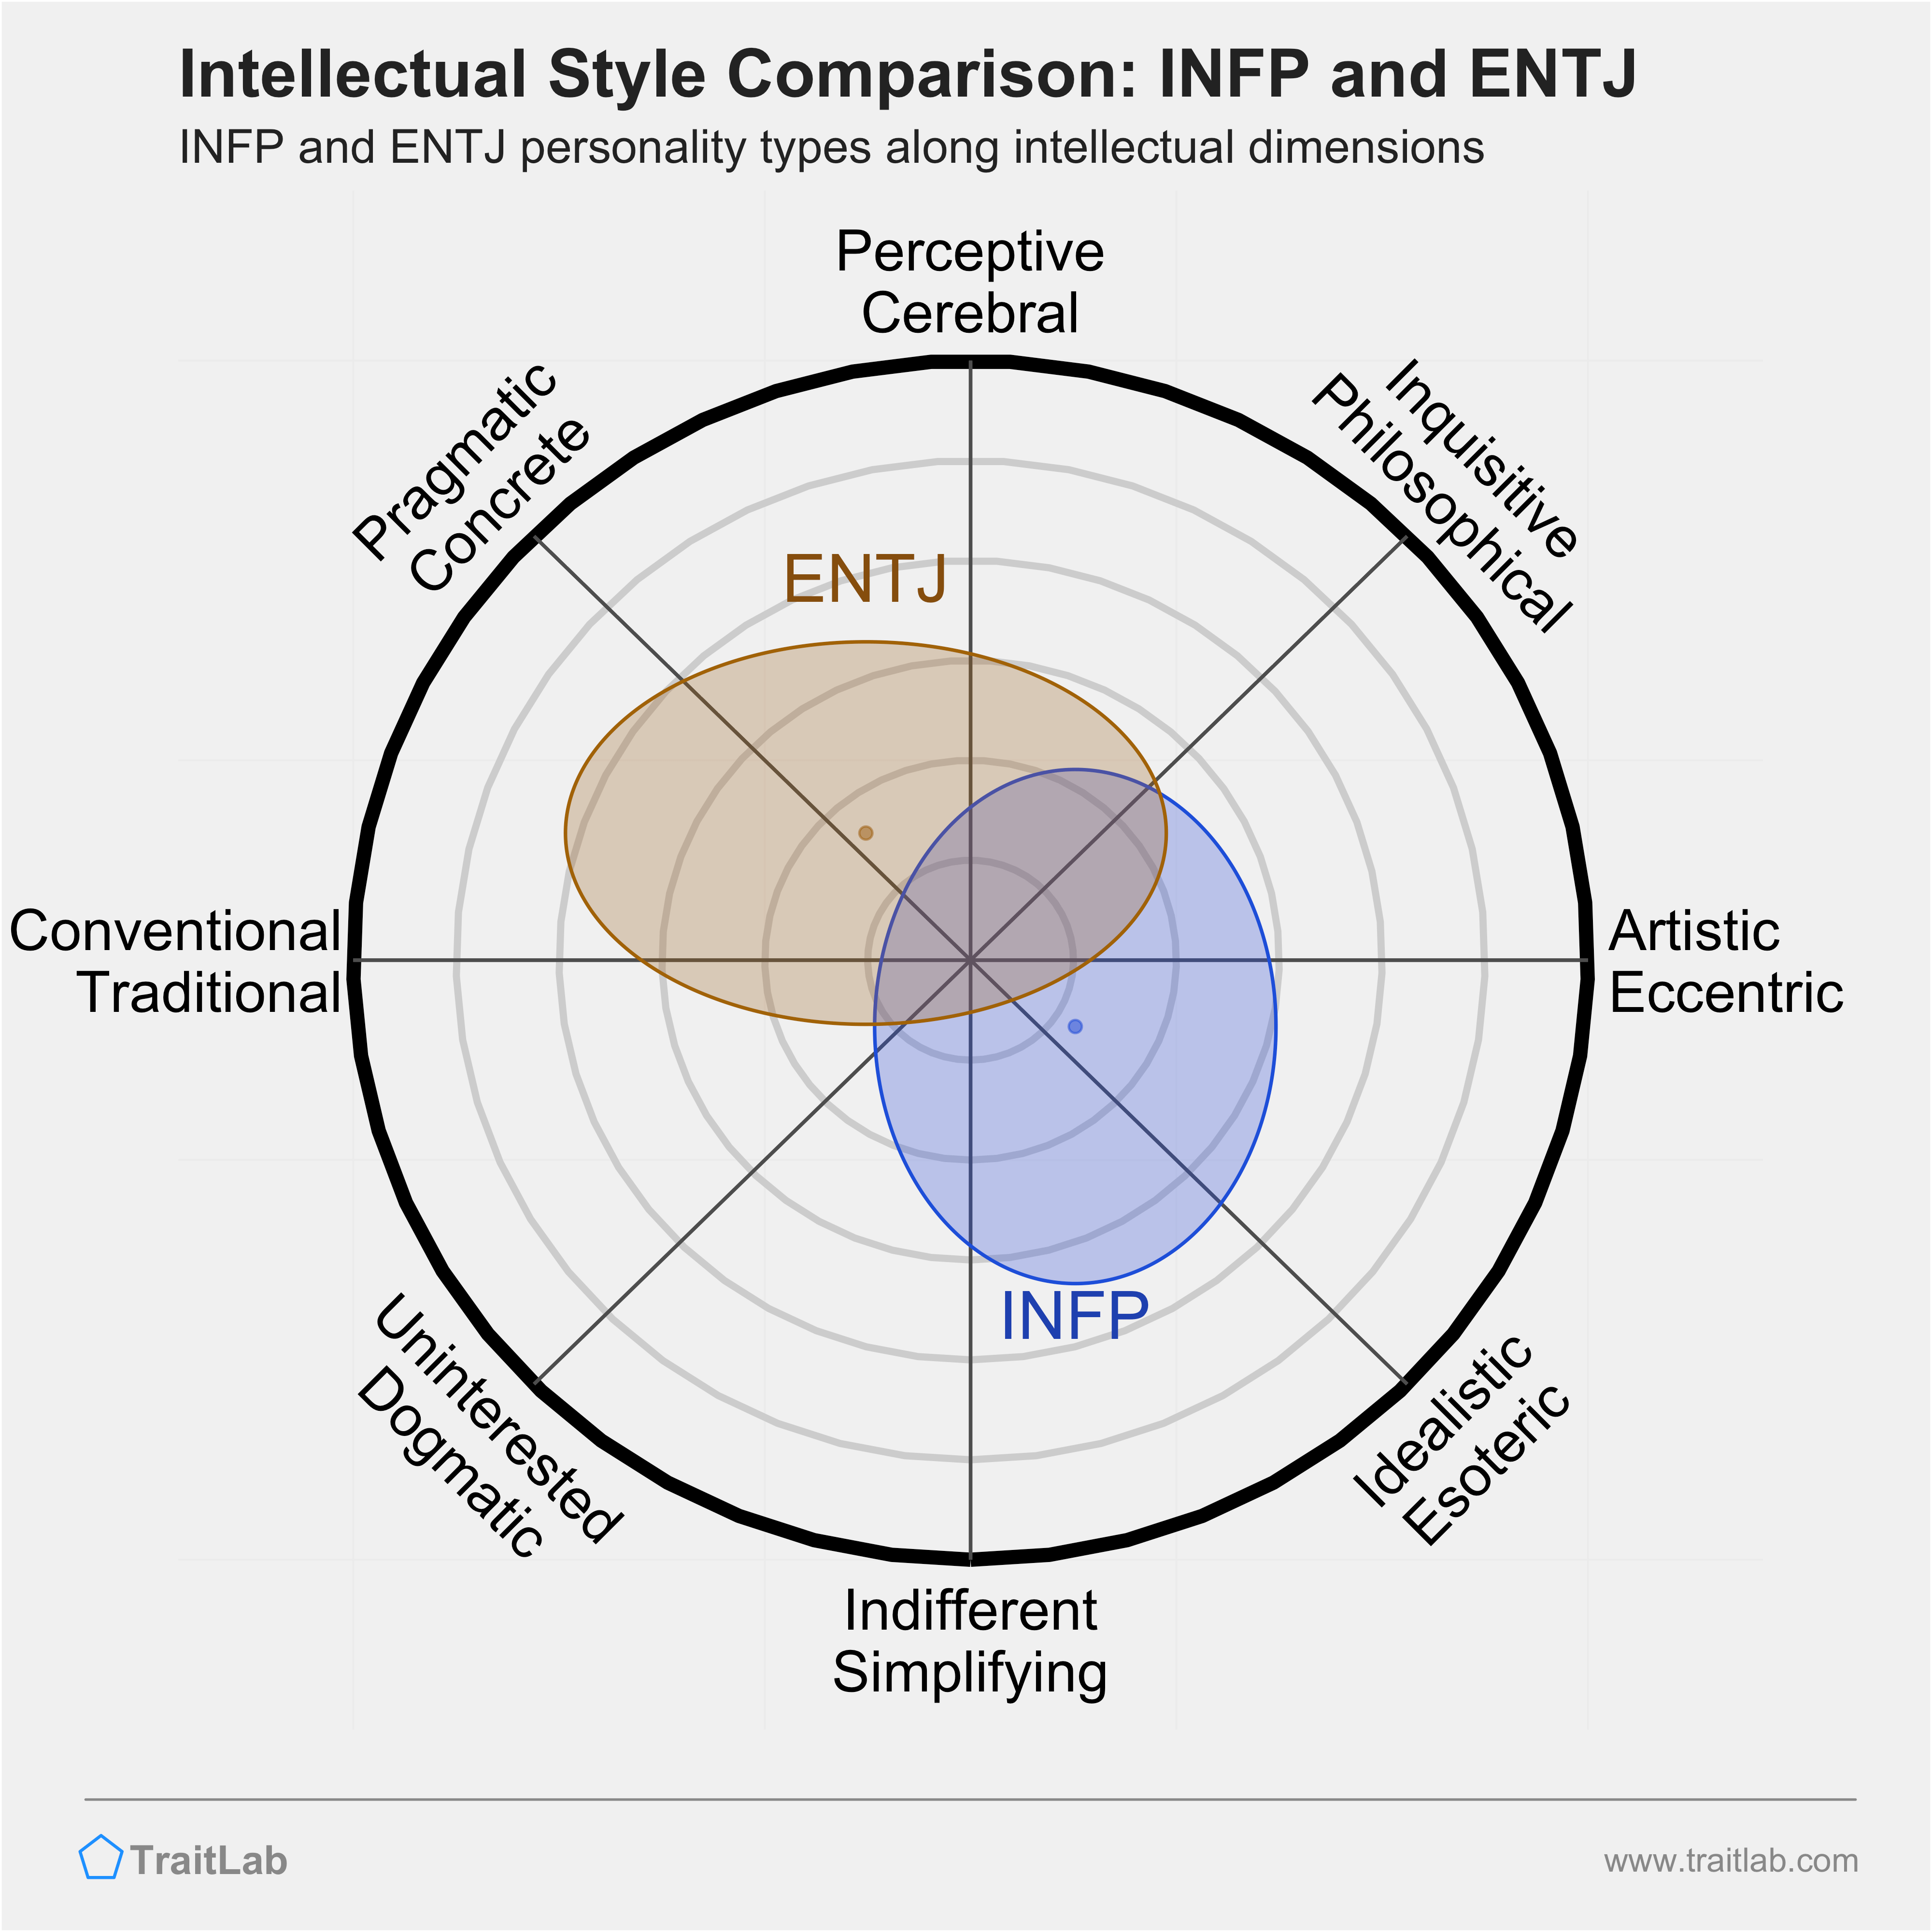 INFP and ENTJ comparison across intellectual dimensions